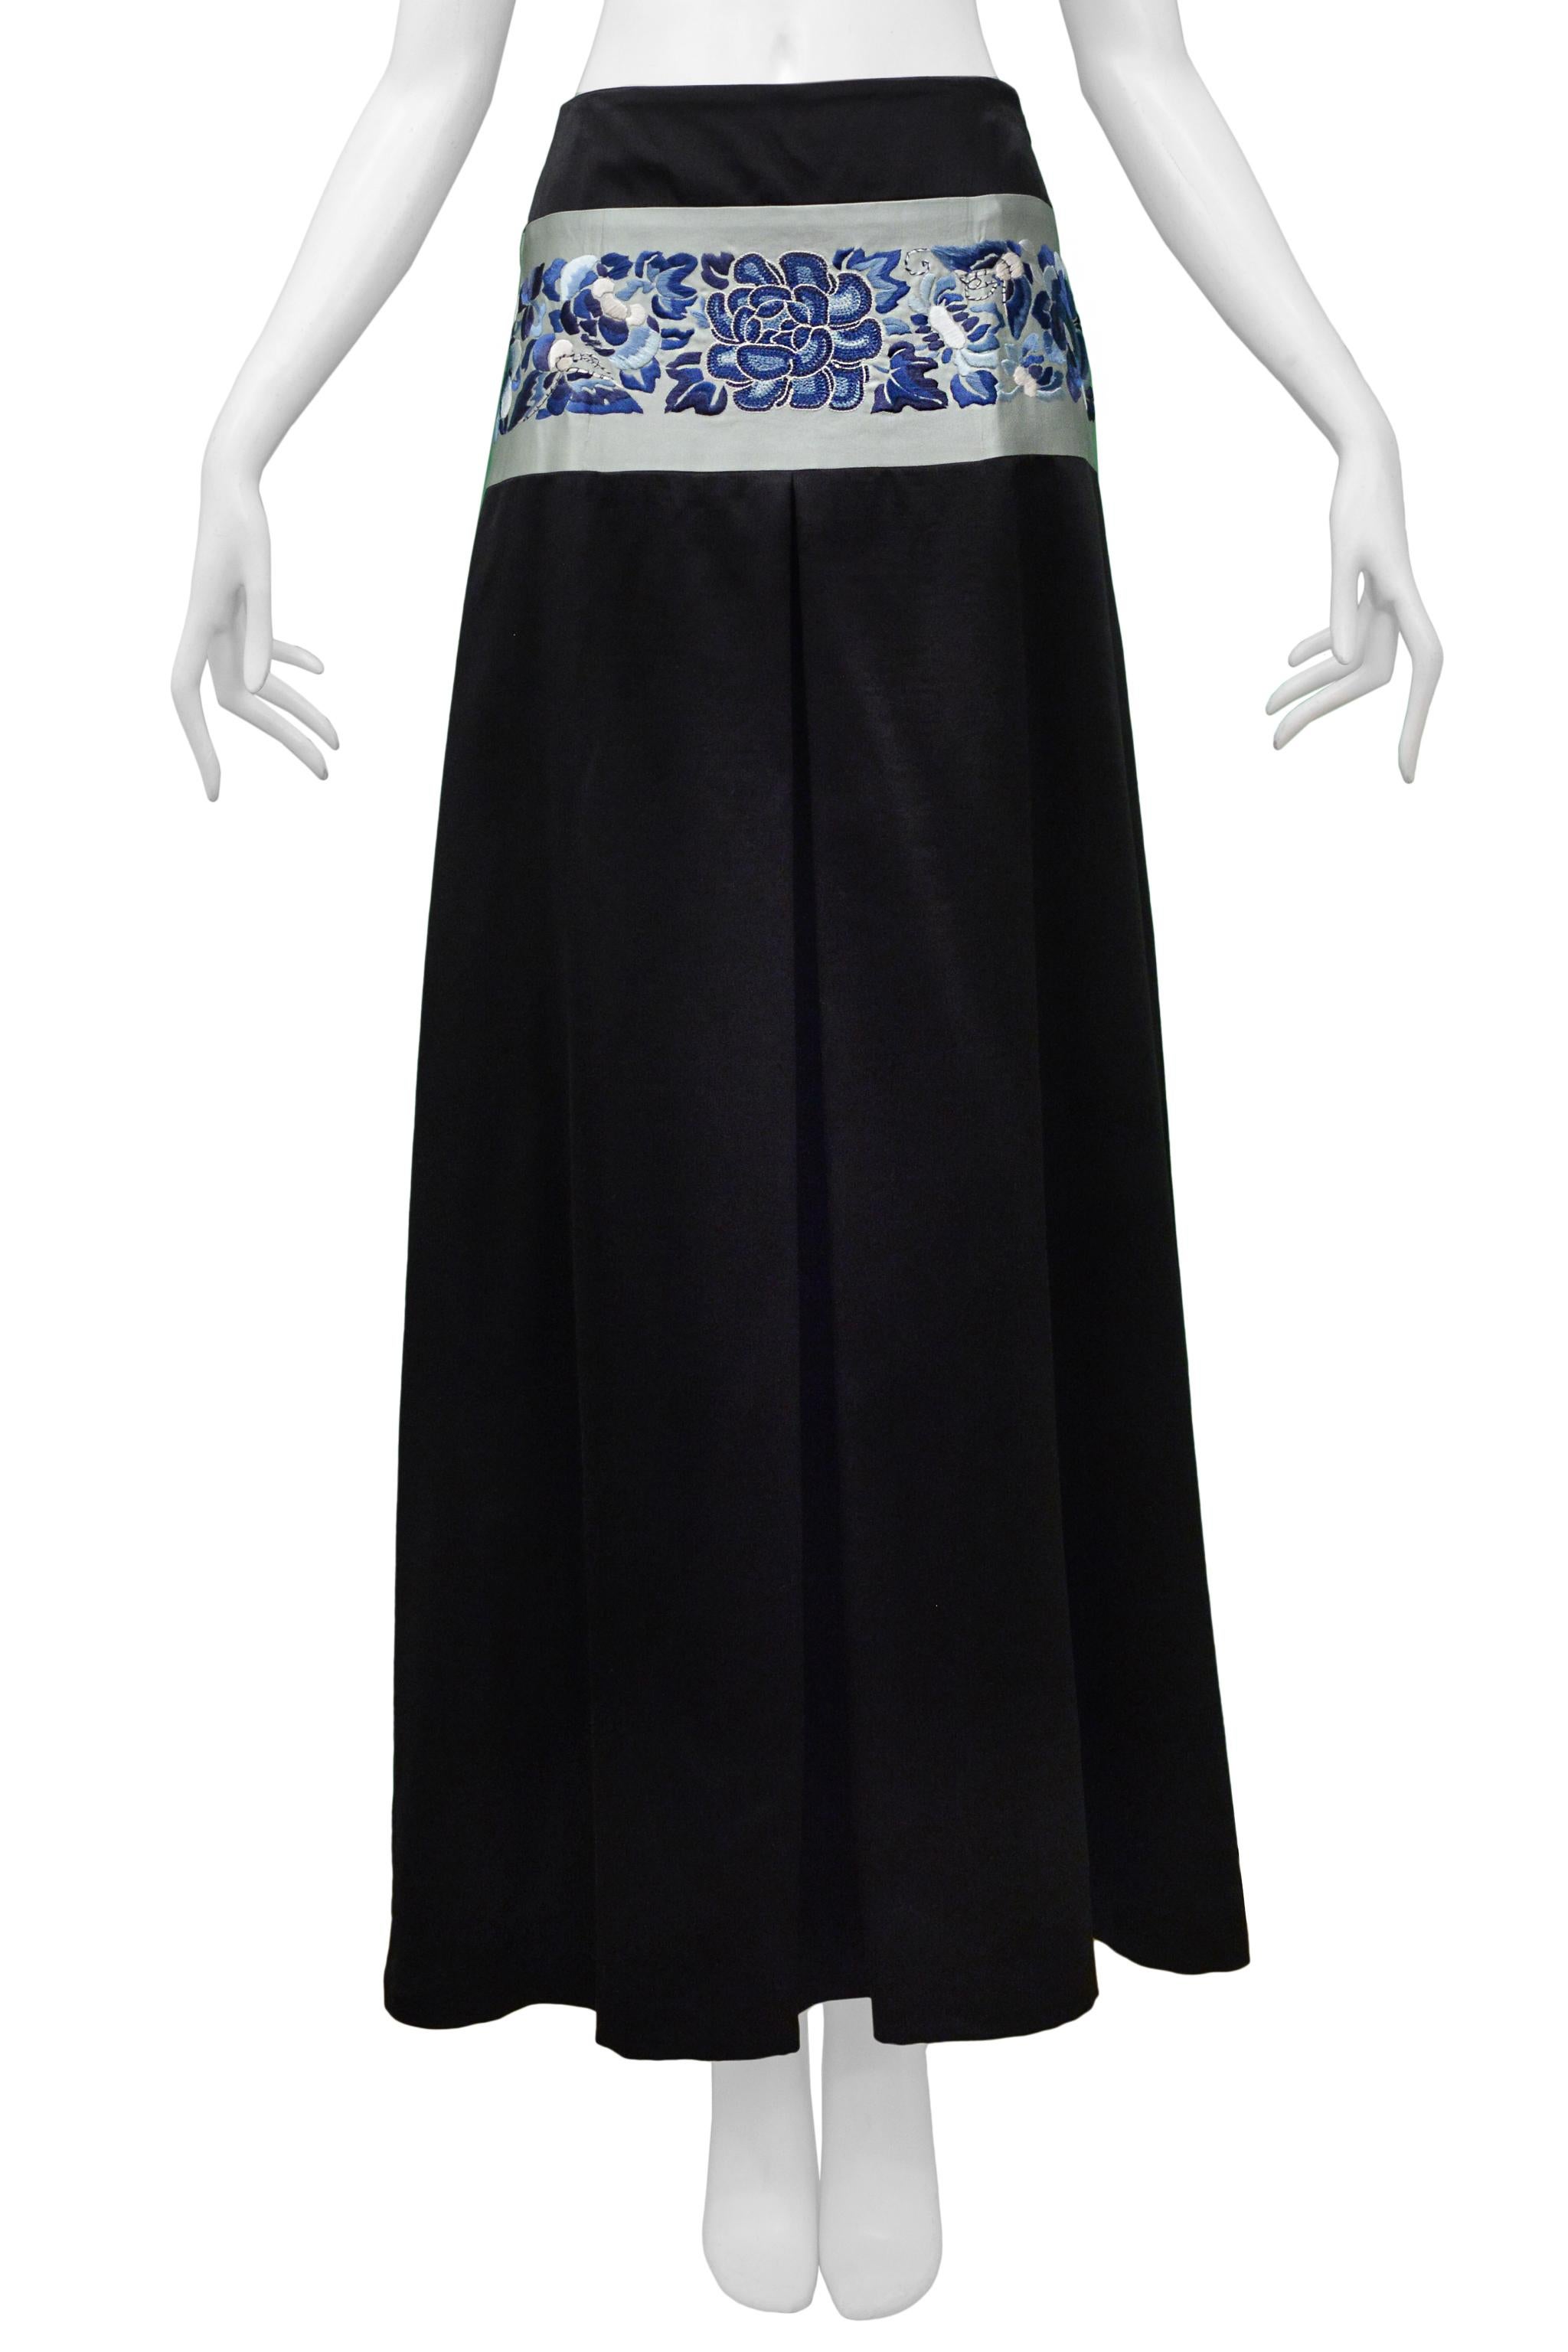 John Galliano Black Satin Maxi Skirt With Blue Floral Asian Inspired Waistband In Excellent Condition For Sale In Los Angeles, CA